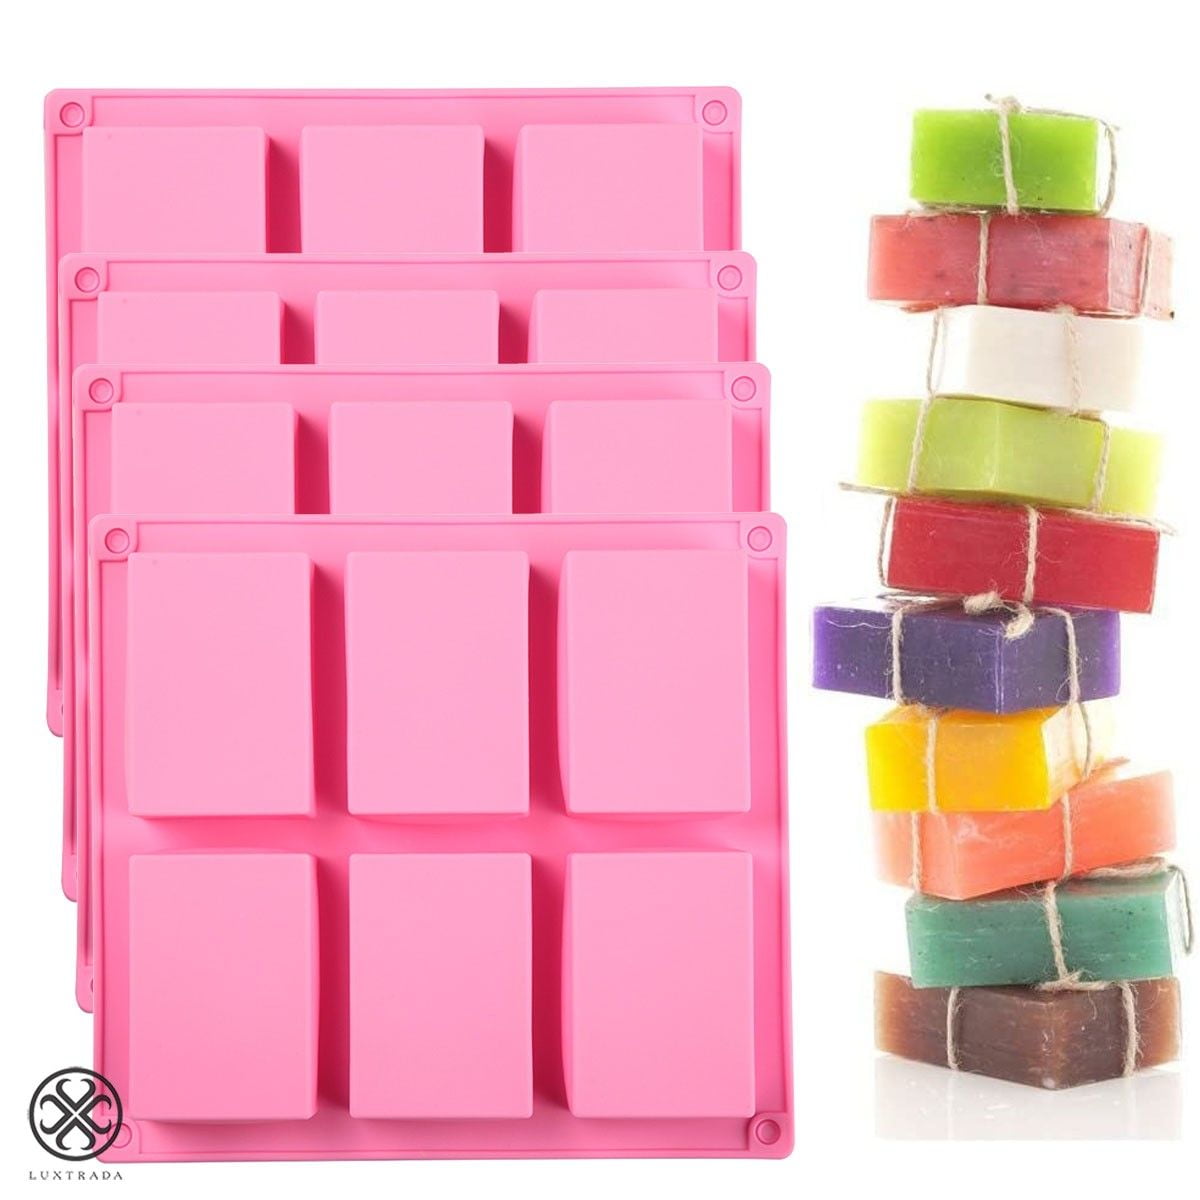 DIY Silicone Soap Mold Square Homemade Cake Loaf Baking Mold Ice Cube Mould